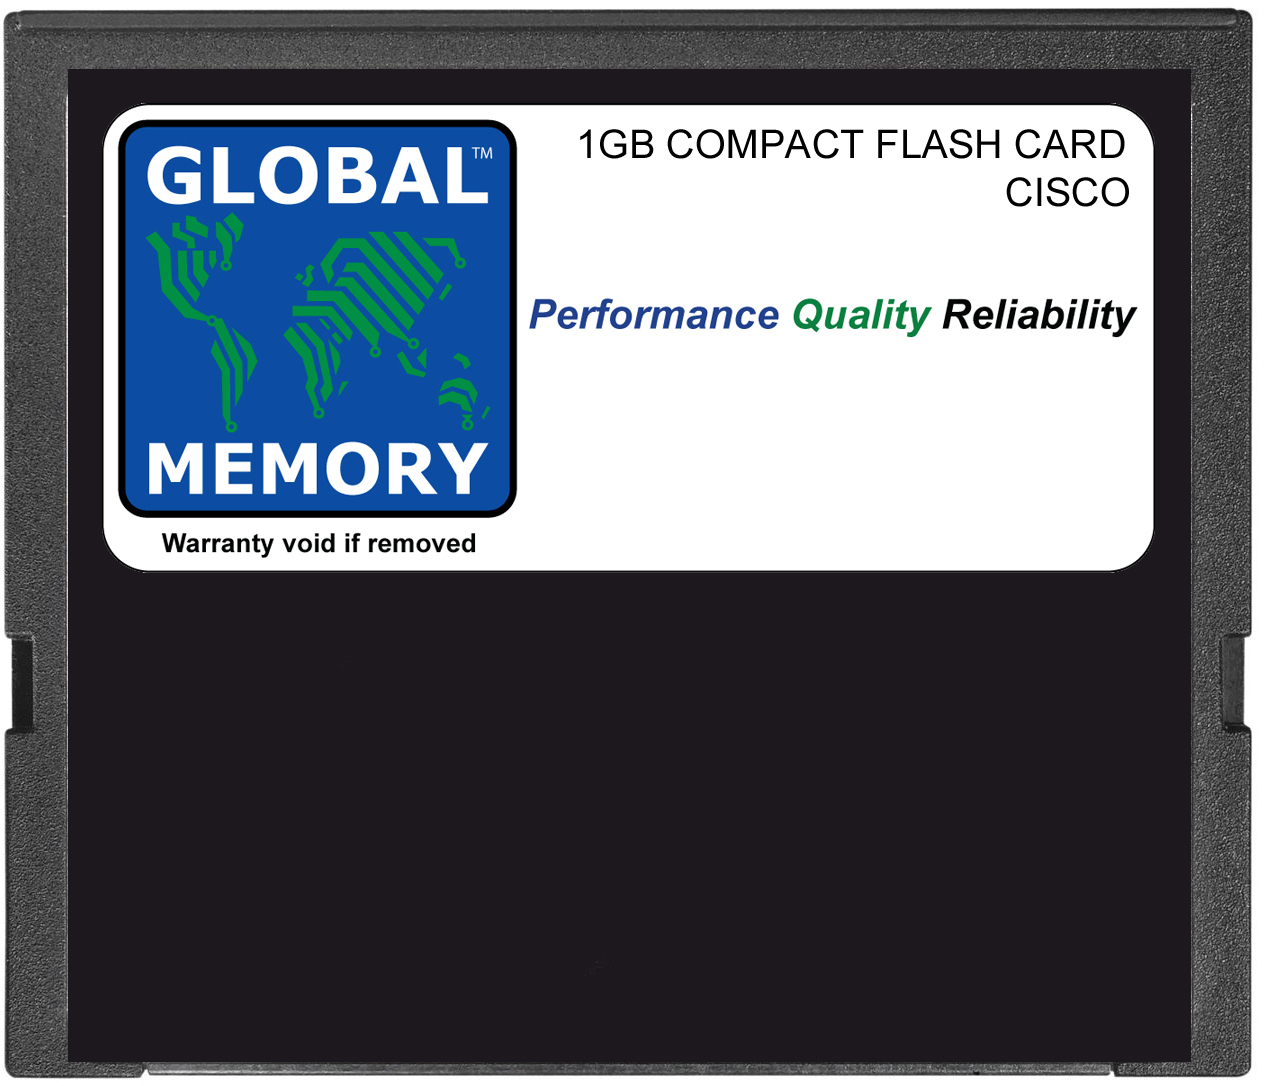 1GB COMPACT FLASH CARD MEMORY FOR CISCO 1900 / 2900 / 3900 SERIES ROUTERS (MEM-CF-1GB) - Click Image to Close